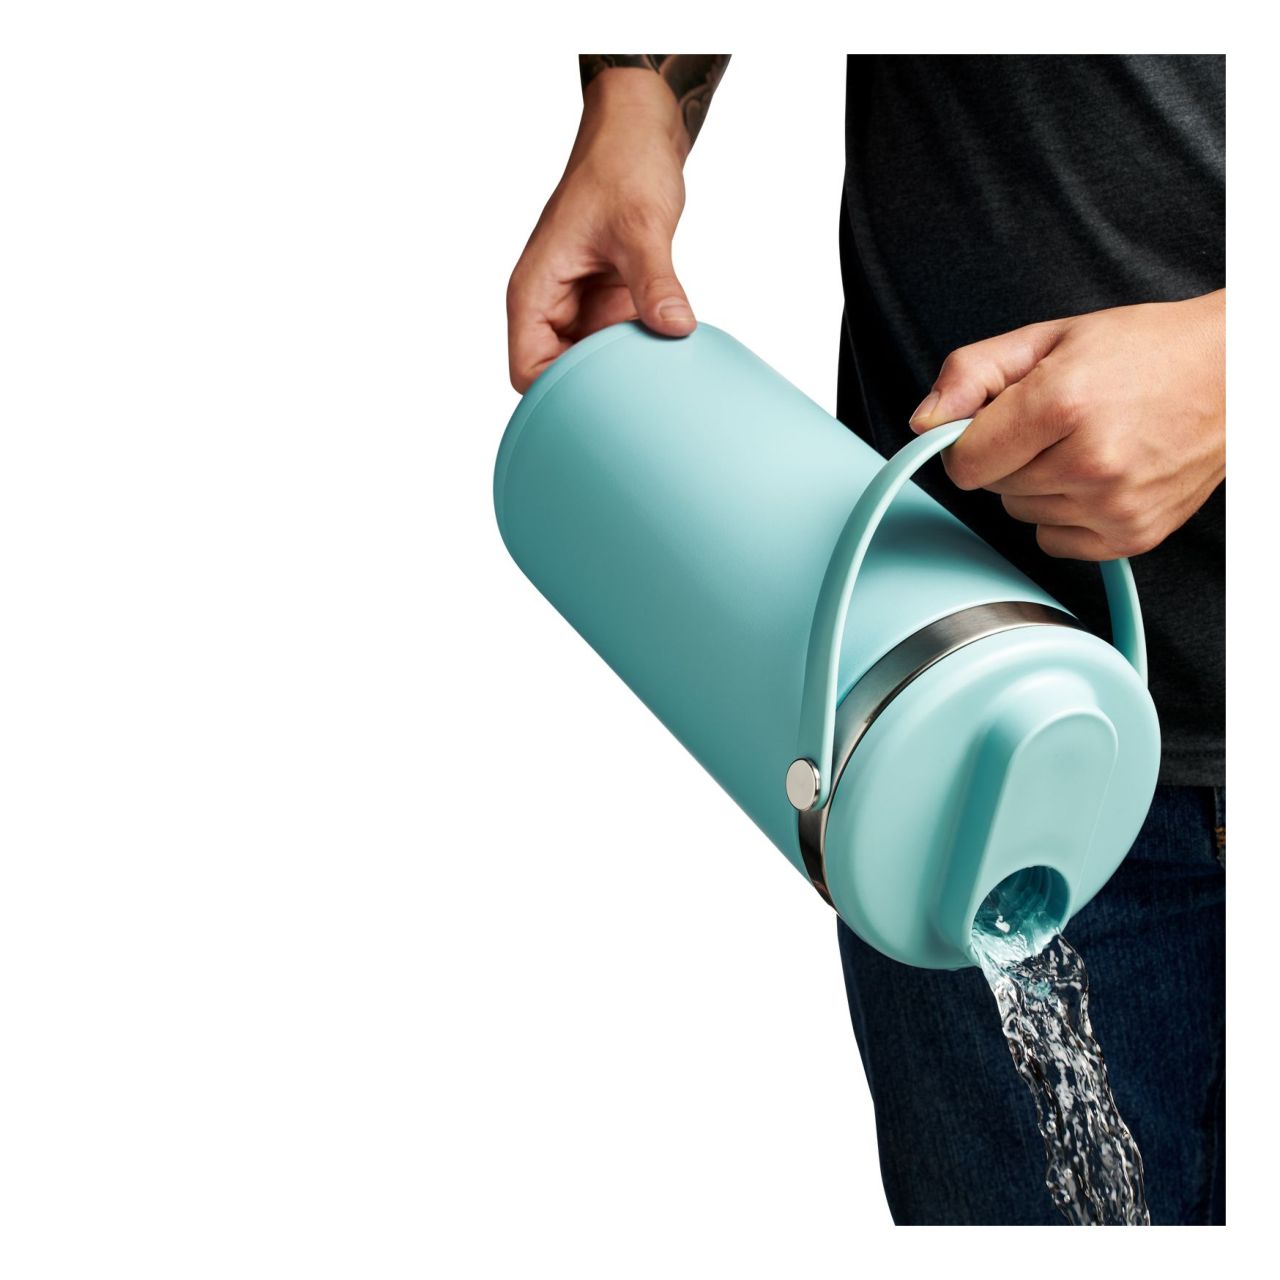 Hydro Flask Oasis Review - 1 Gallon Water Jug Is Nearly Indestructible